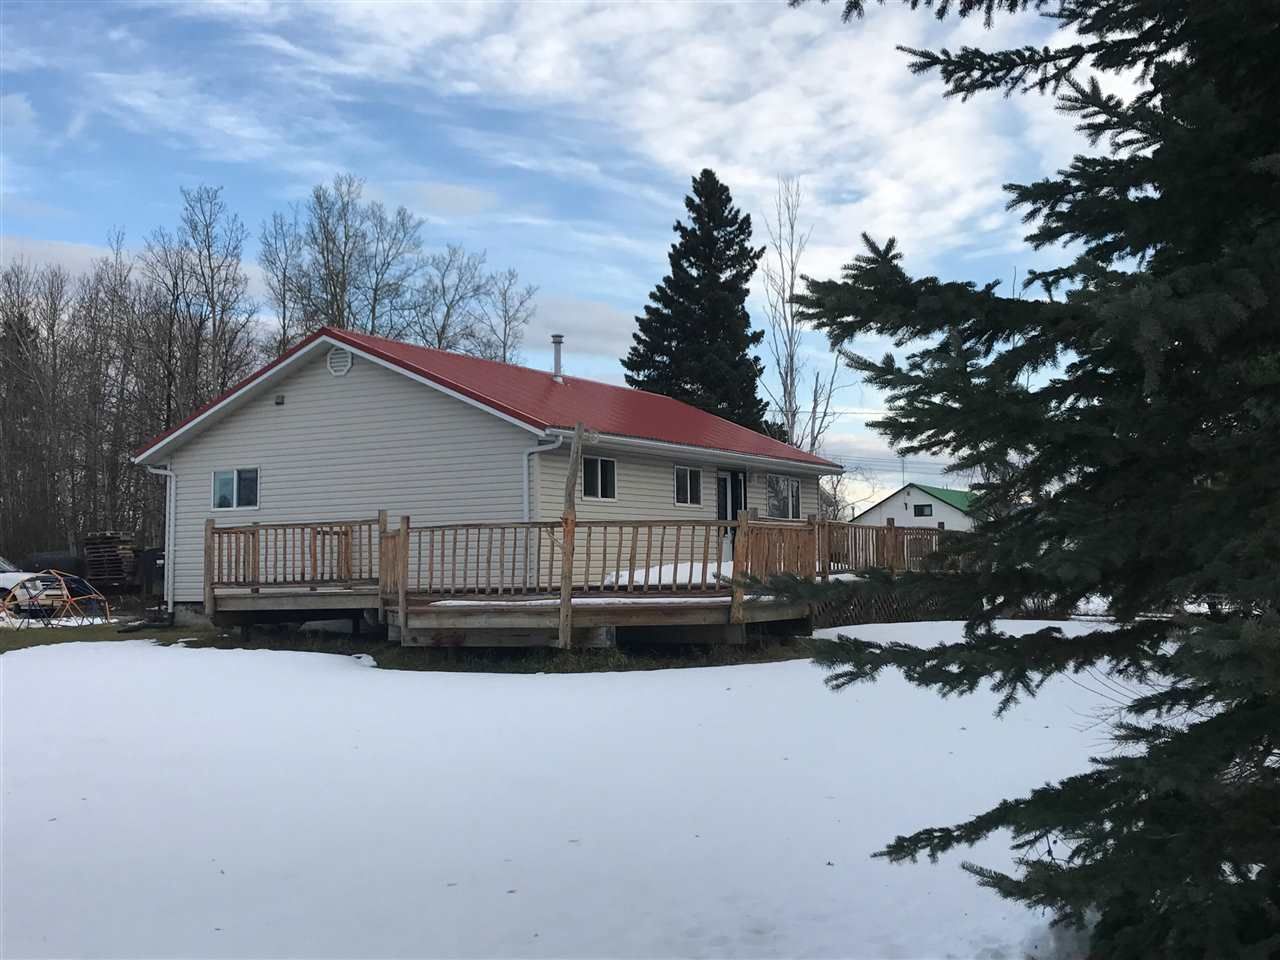 Main Photo: 12286 242 Road in Charlie Lake: Lakeshore House for sale (Fort St. John (Zone 60))  : MLS®# R2222938